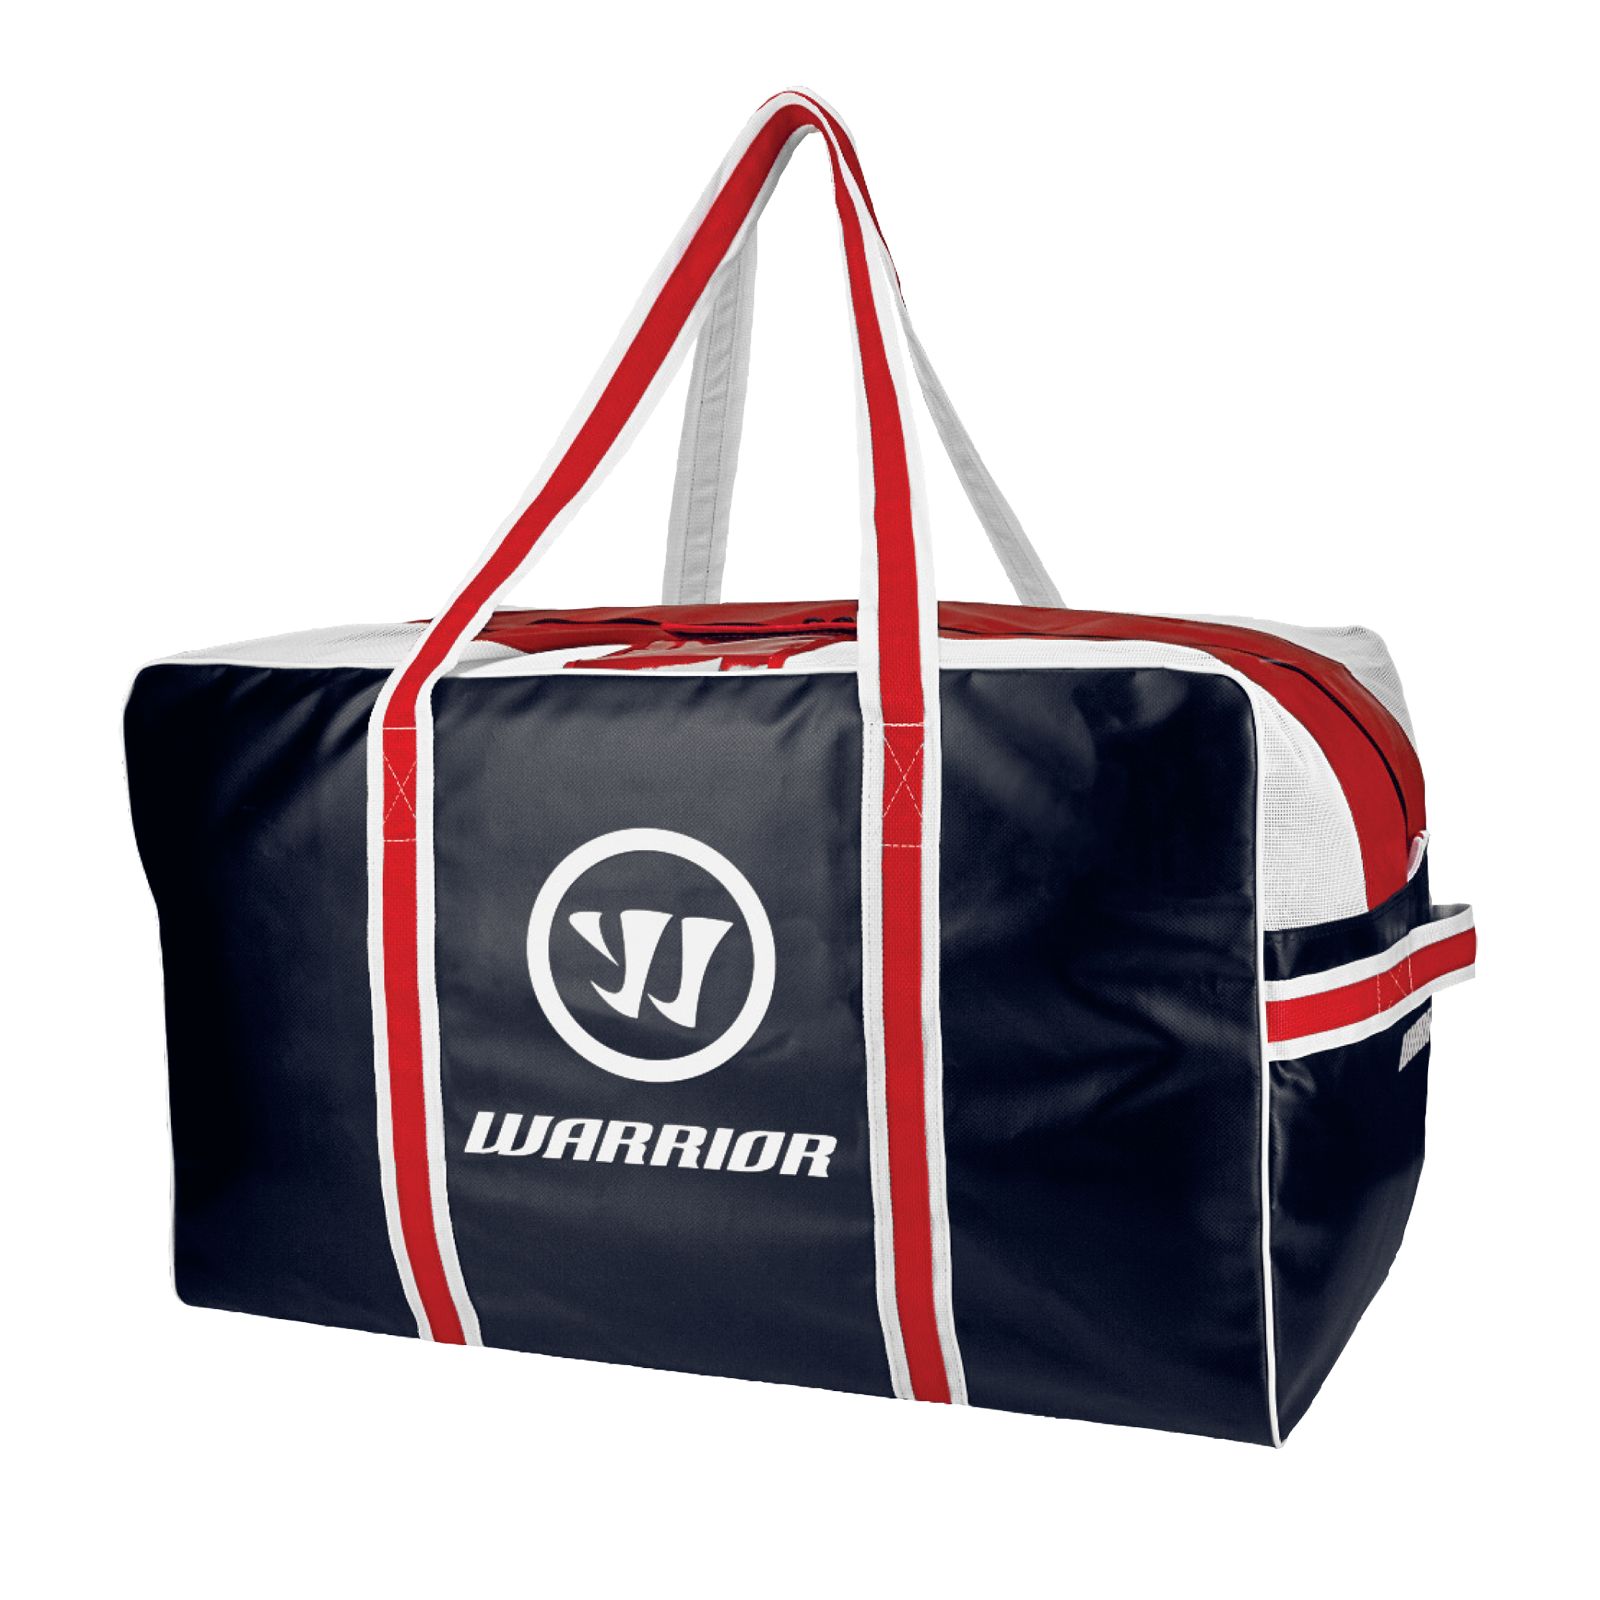 Warrior Pro Bag, Navy with Red & White image number 1